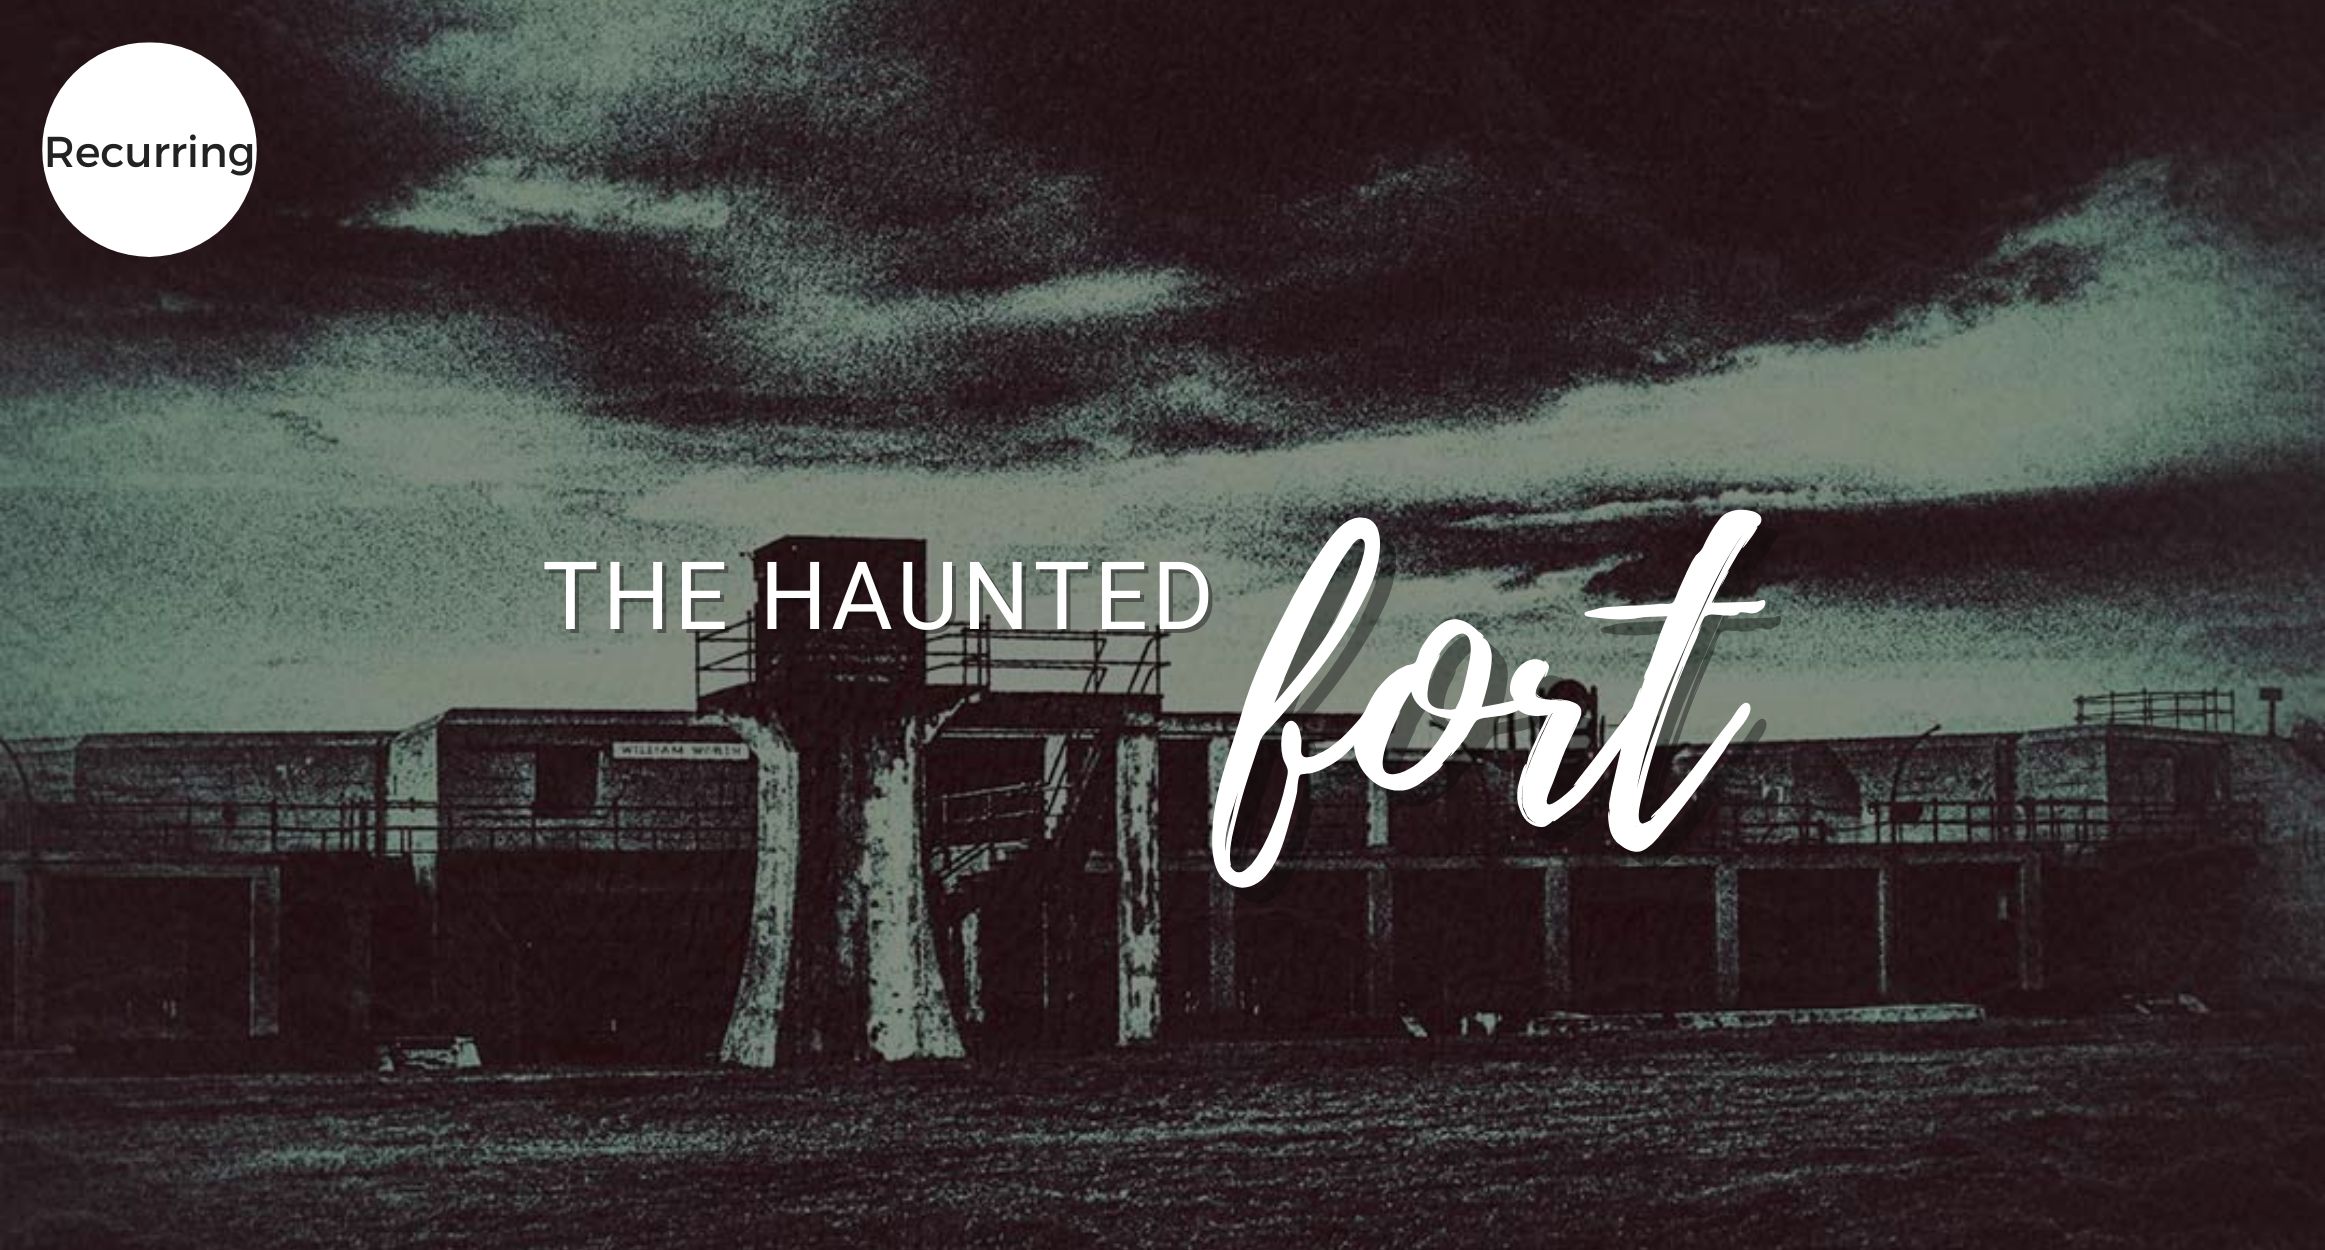 The haunted Fort, Fort casey State Park , Whidbey island, Coupeville, Washington, Halloween